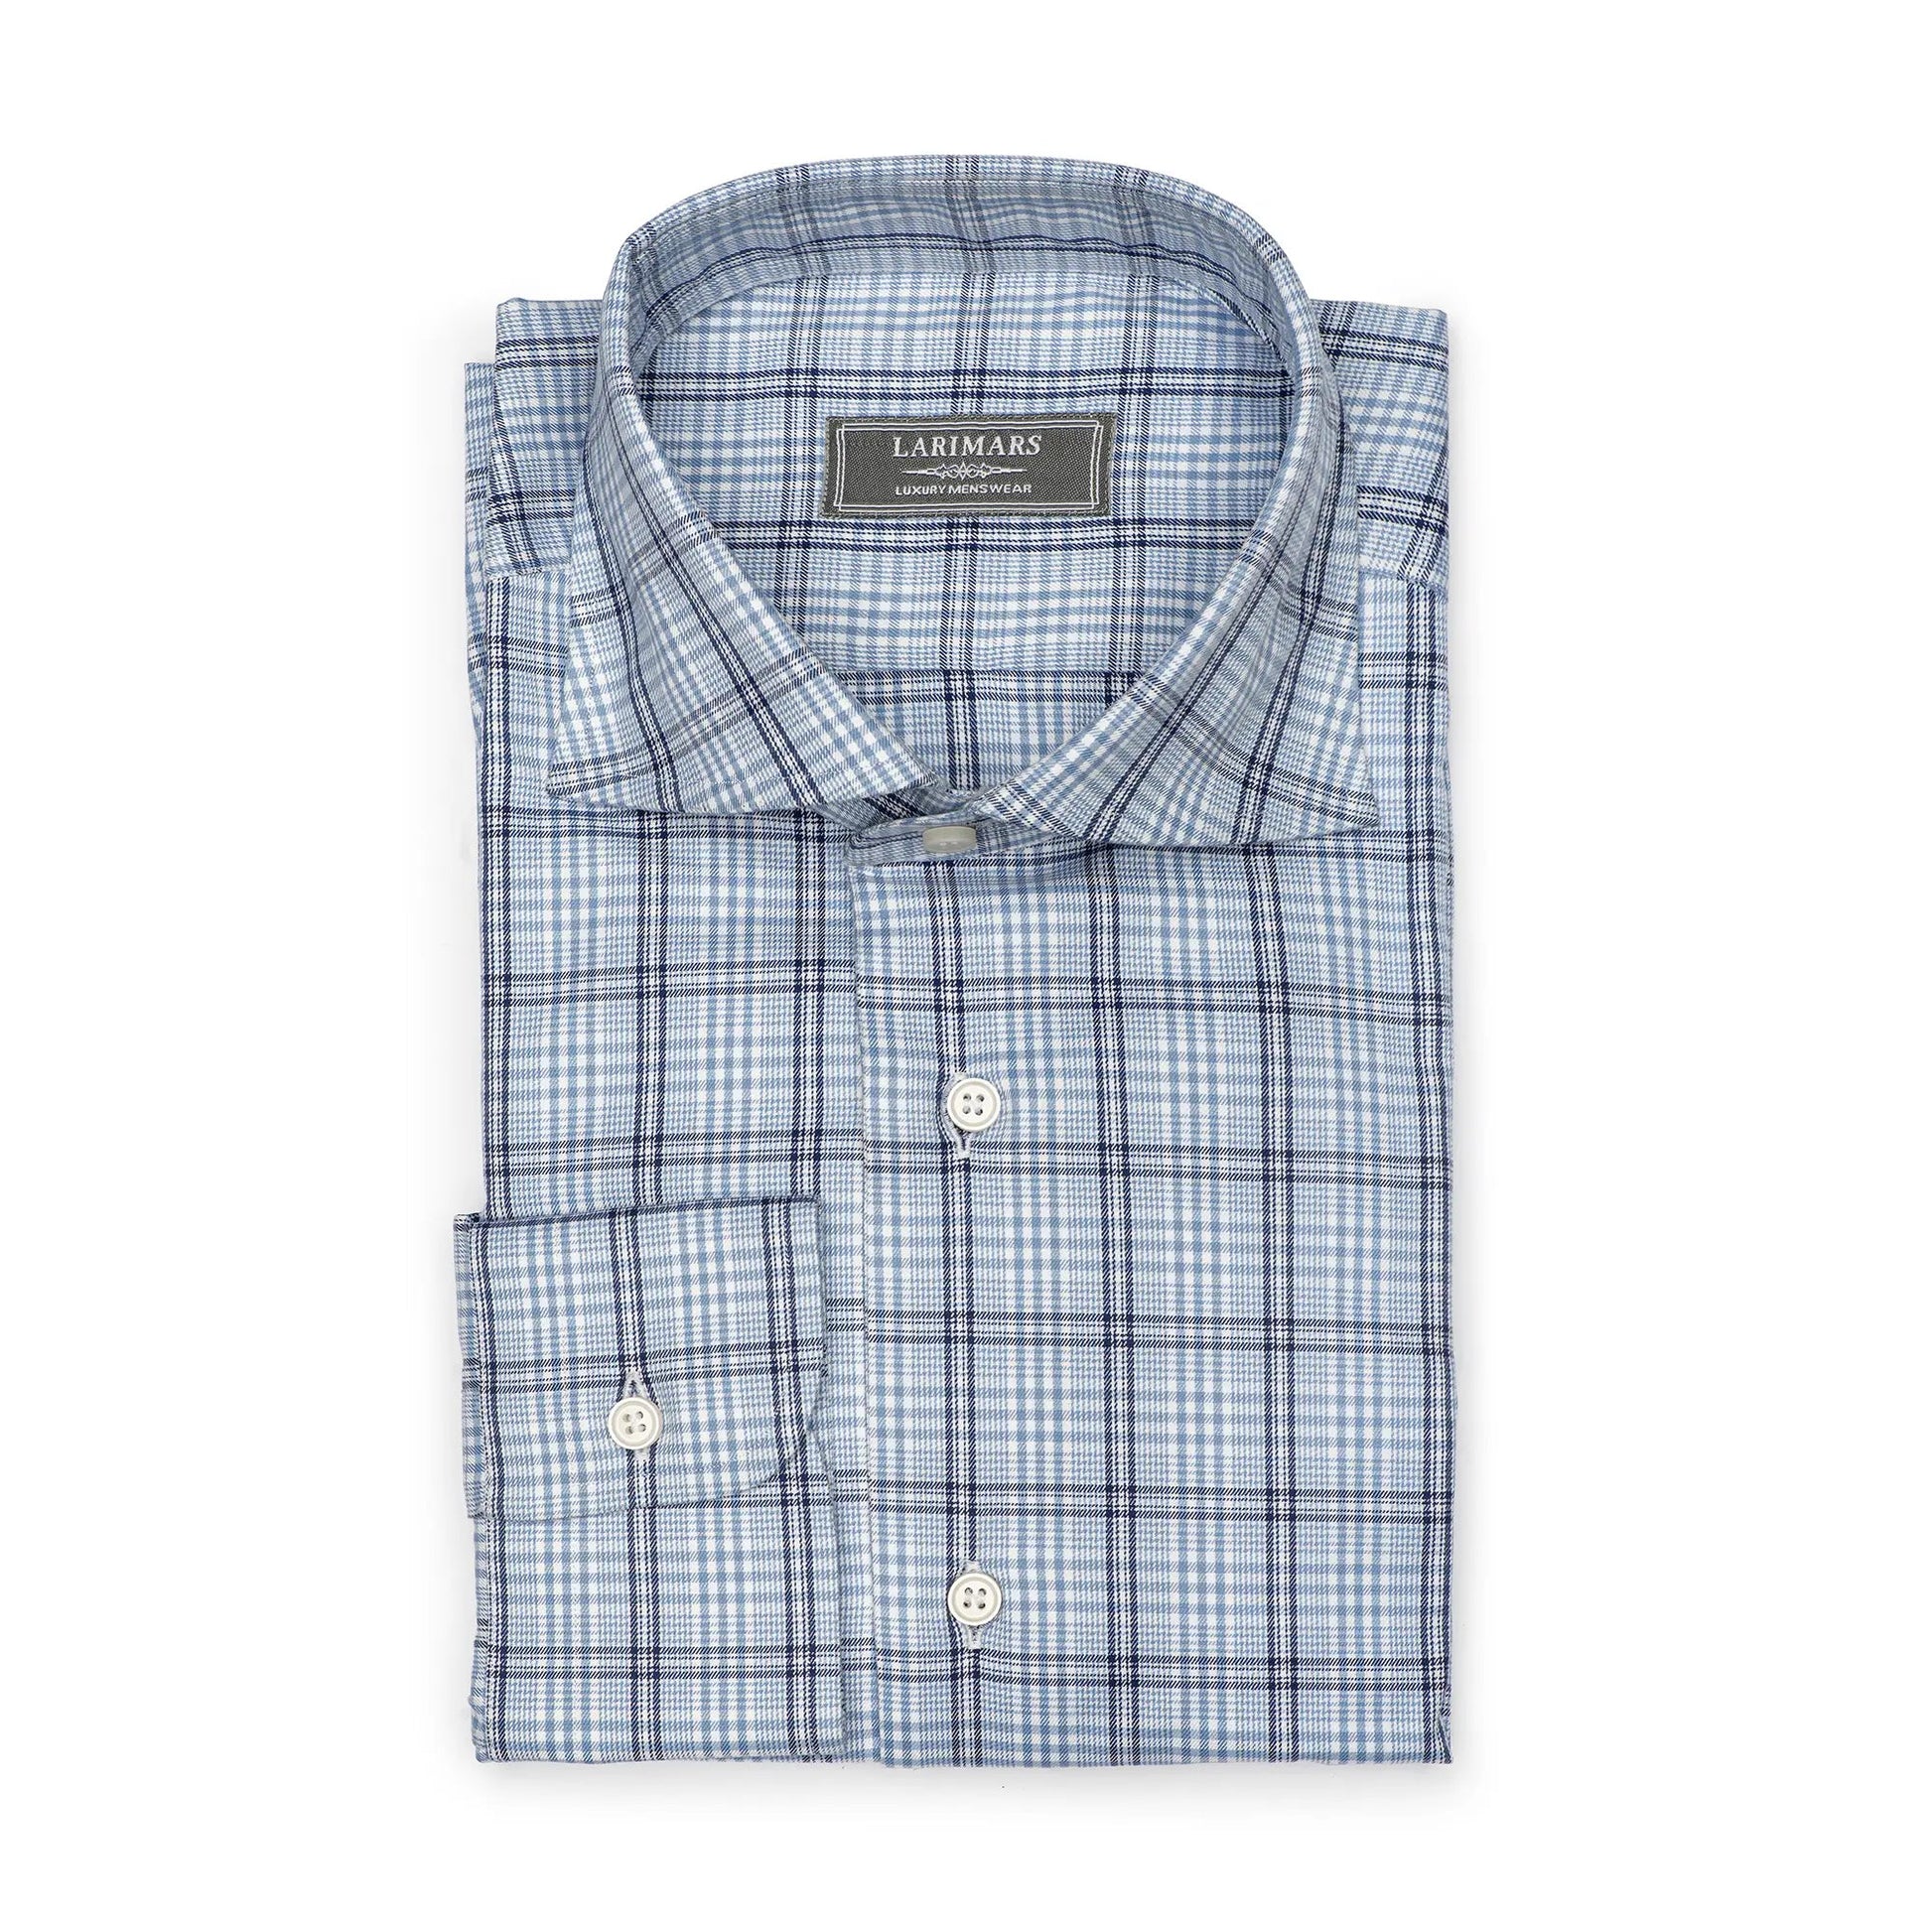 Blue Large Check - Larimars Clothing Men's Formal and casual wear shirts